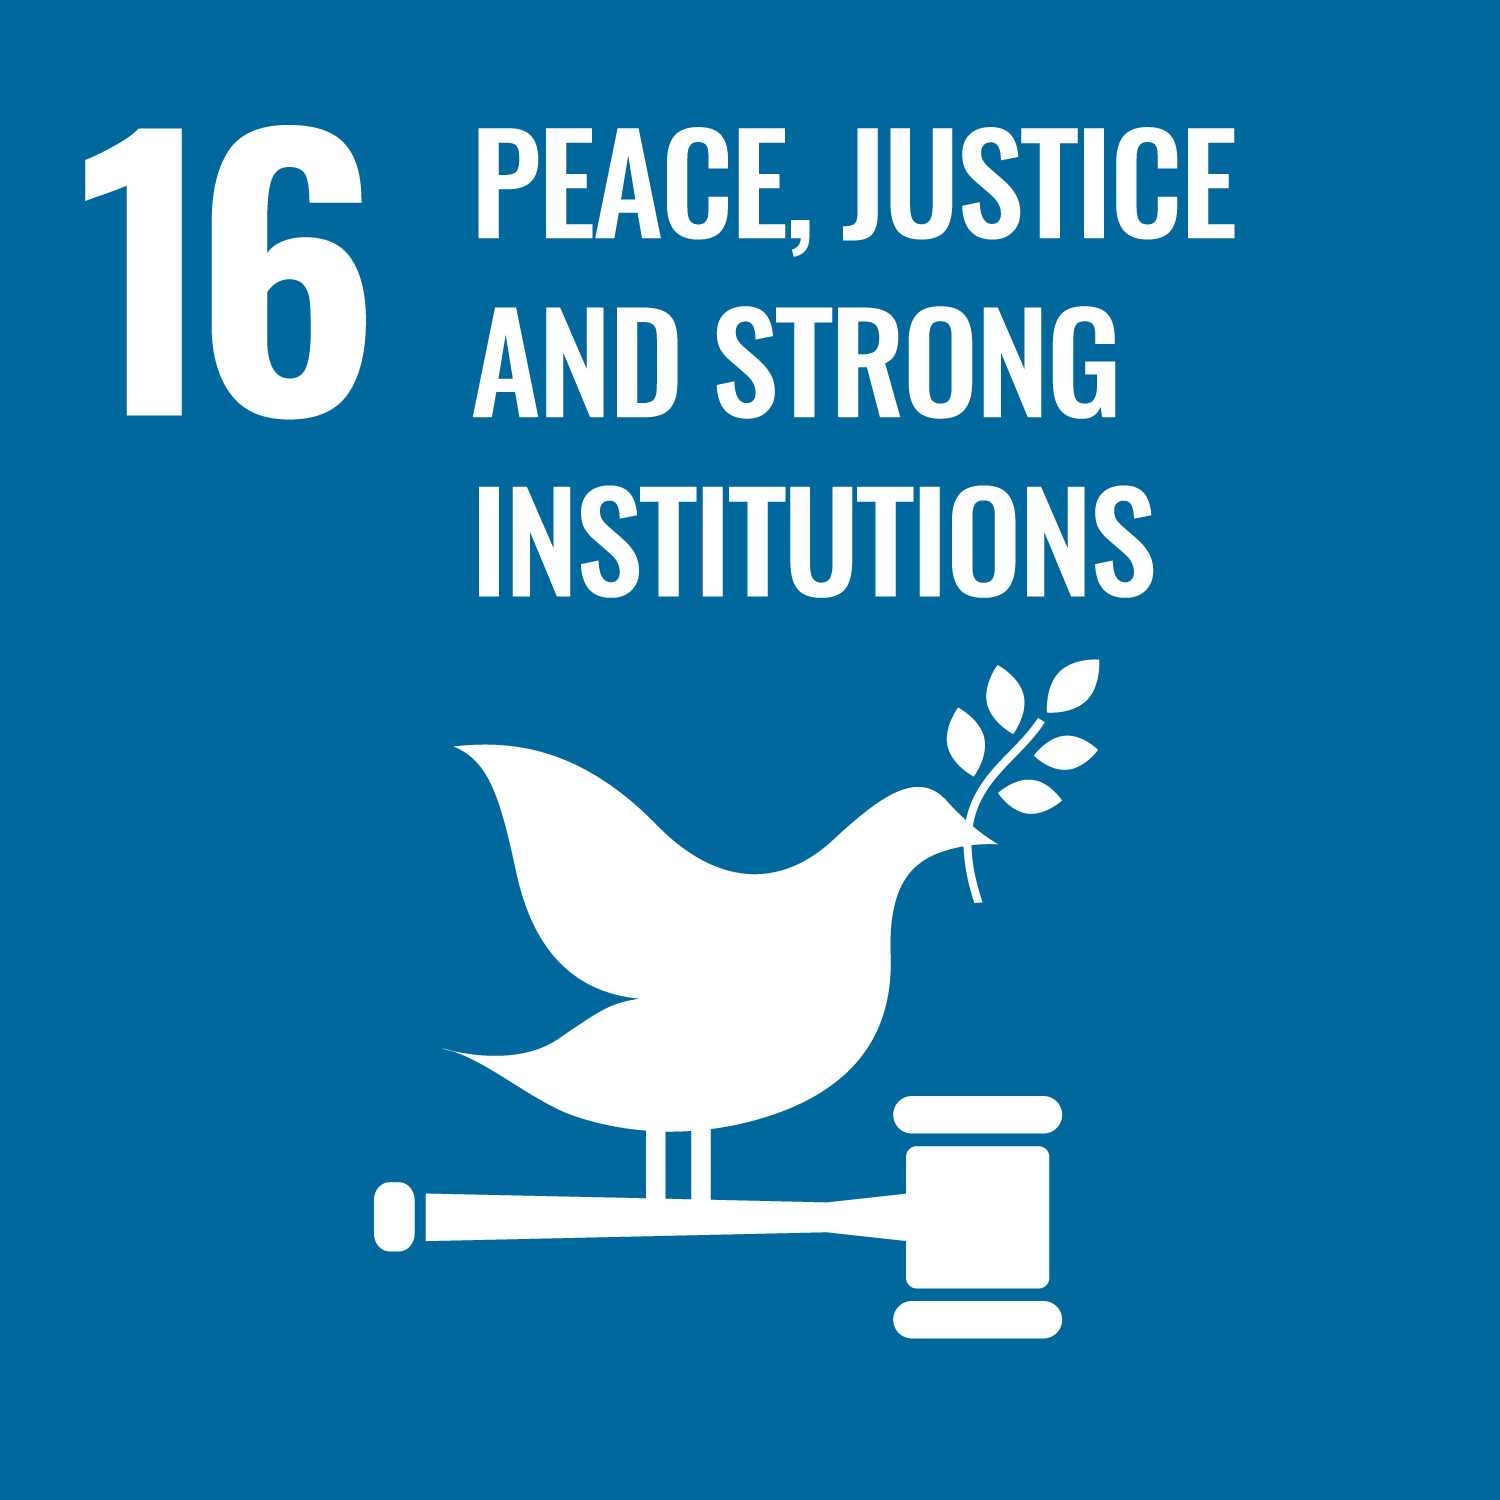 sdg 16 peace and justice